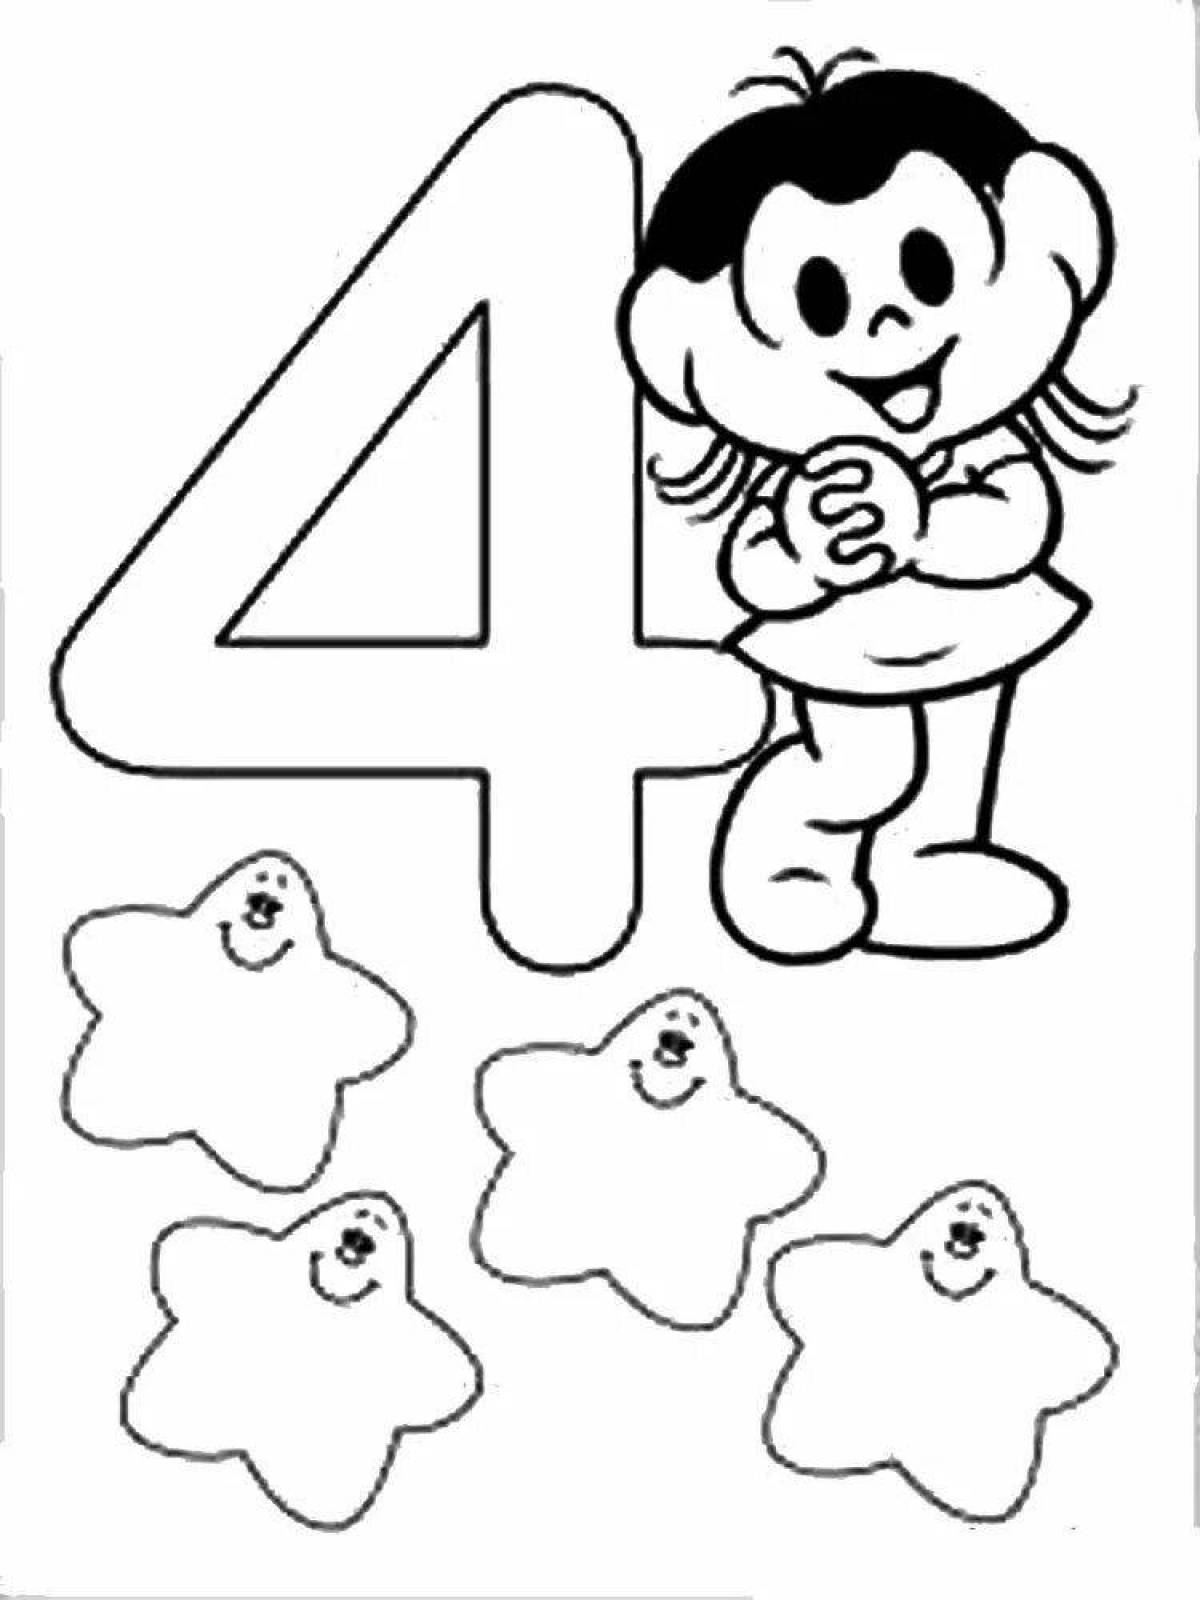 Color dynamic coloring pages with numbers and letters